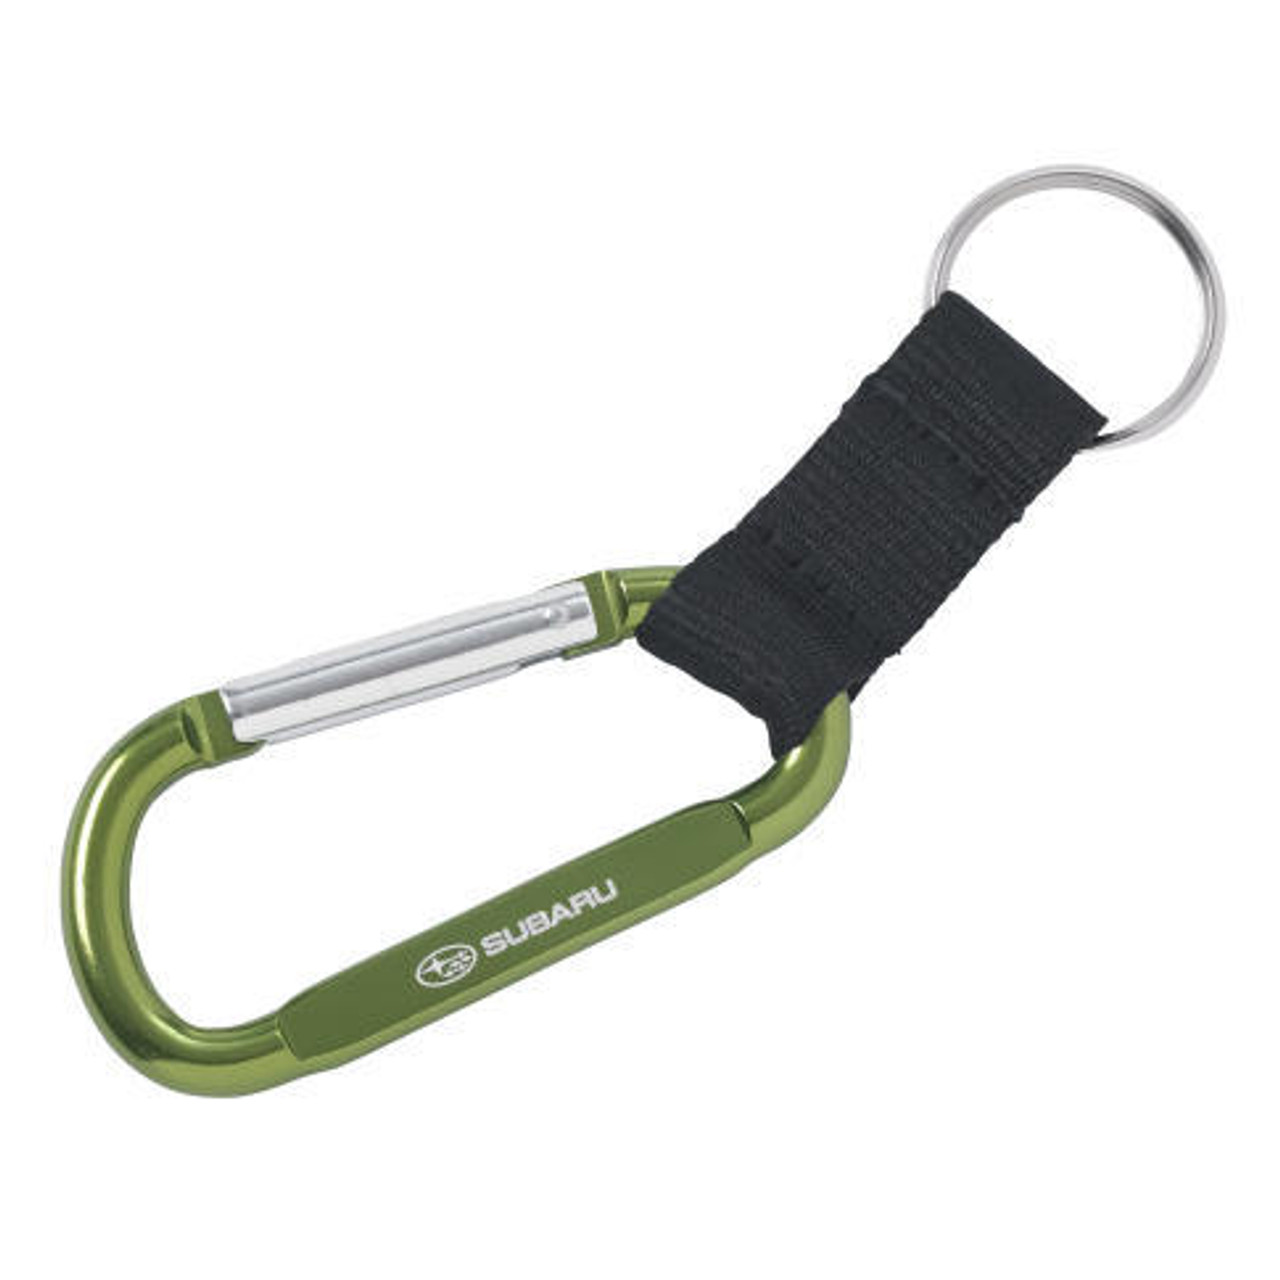 5mm 2 Extra Small Carabiner Key Chain - Green 